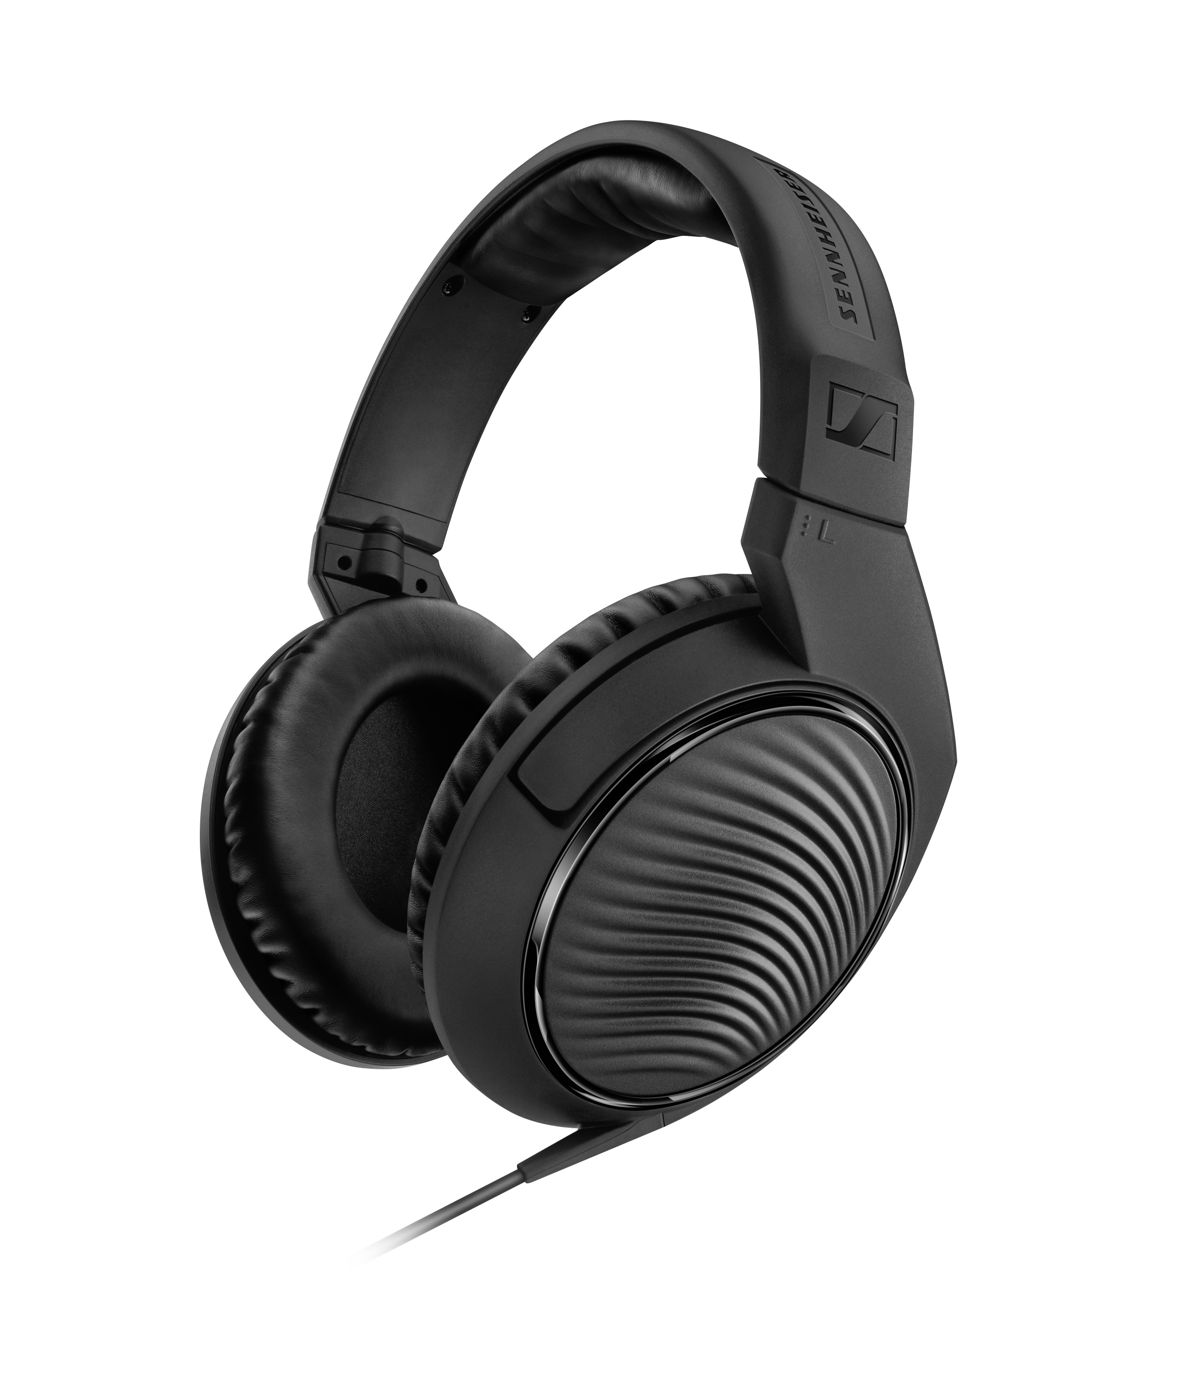 Your companion for powerful studio sound: the HD 200 PRO